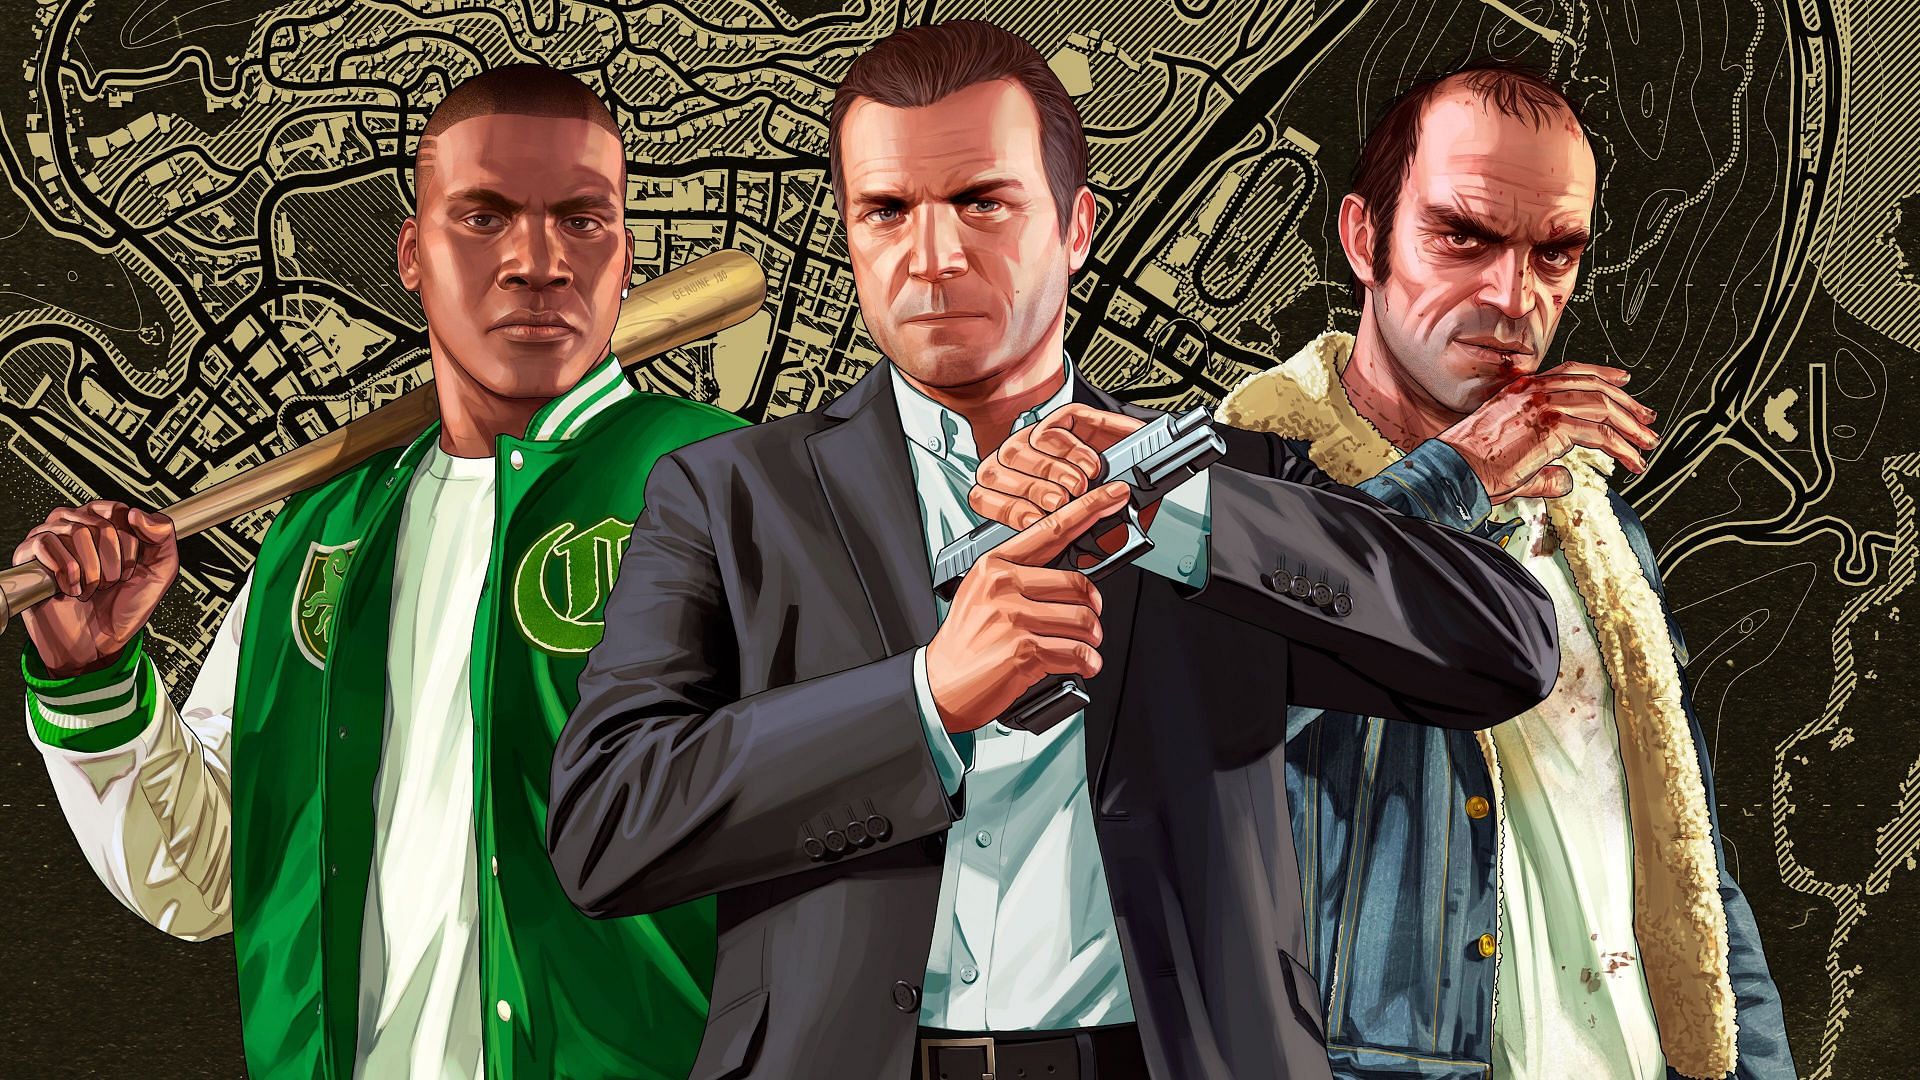 GTA 5 is one of the most popular video games ever (Image via Rockstar Games)